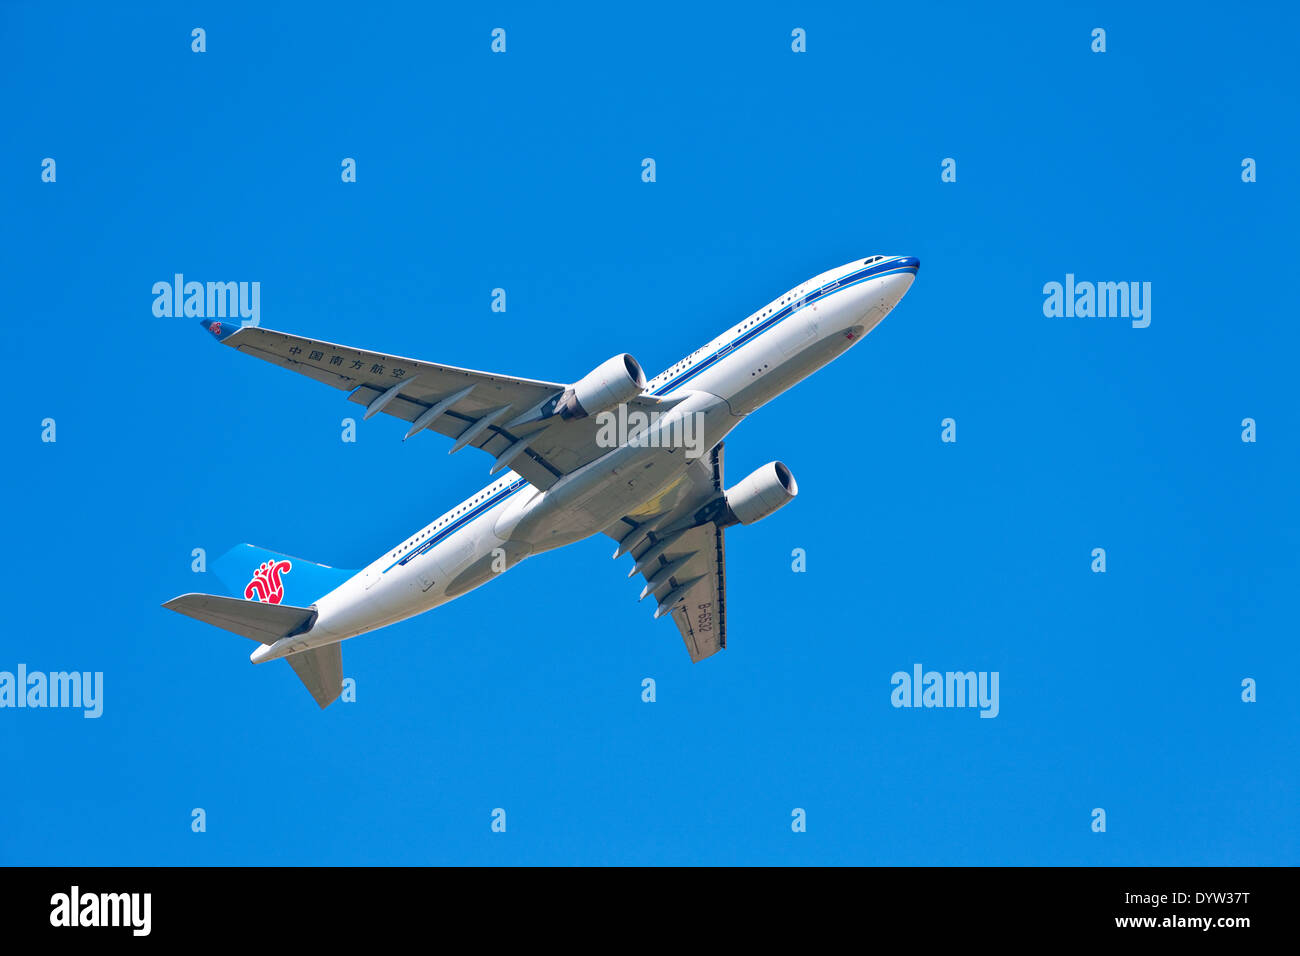 China Southern Airlines aircraft ( Airbus A330-200 ) on the sky Stock Photo